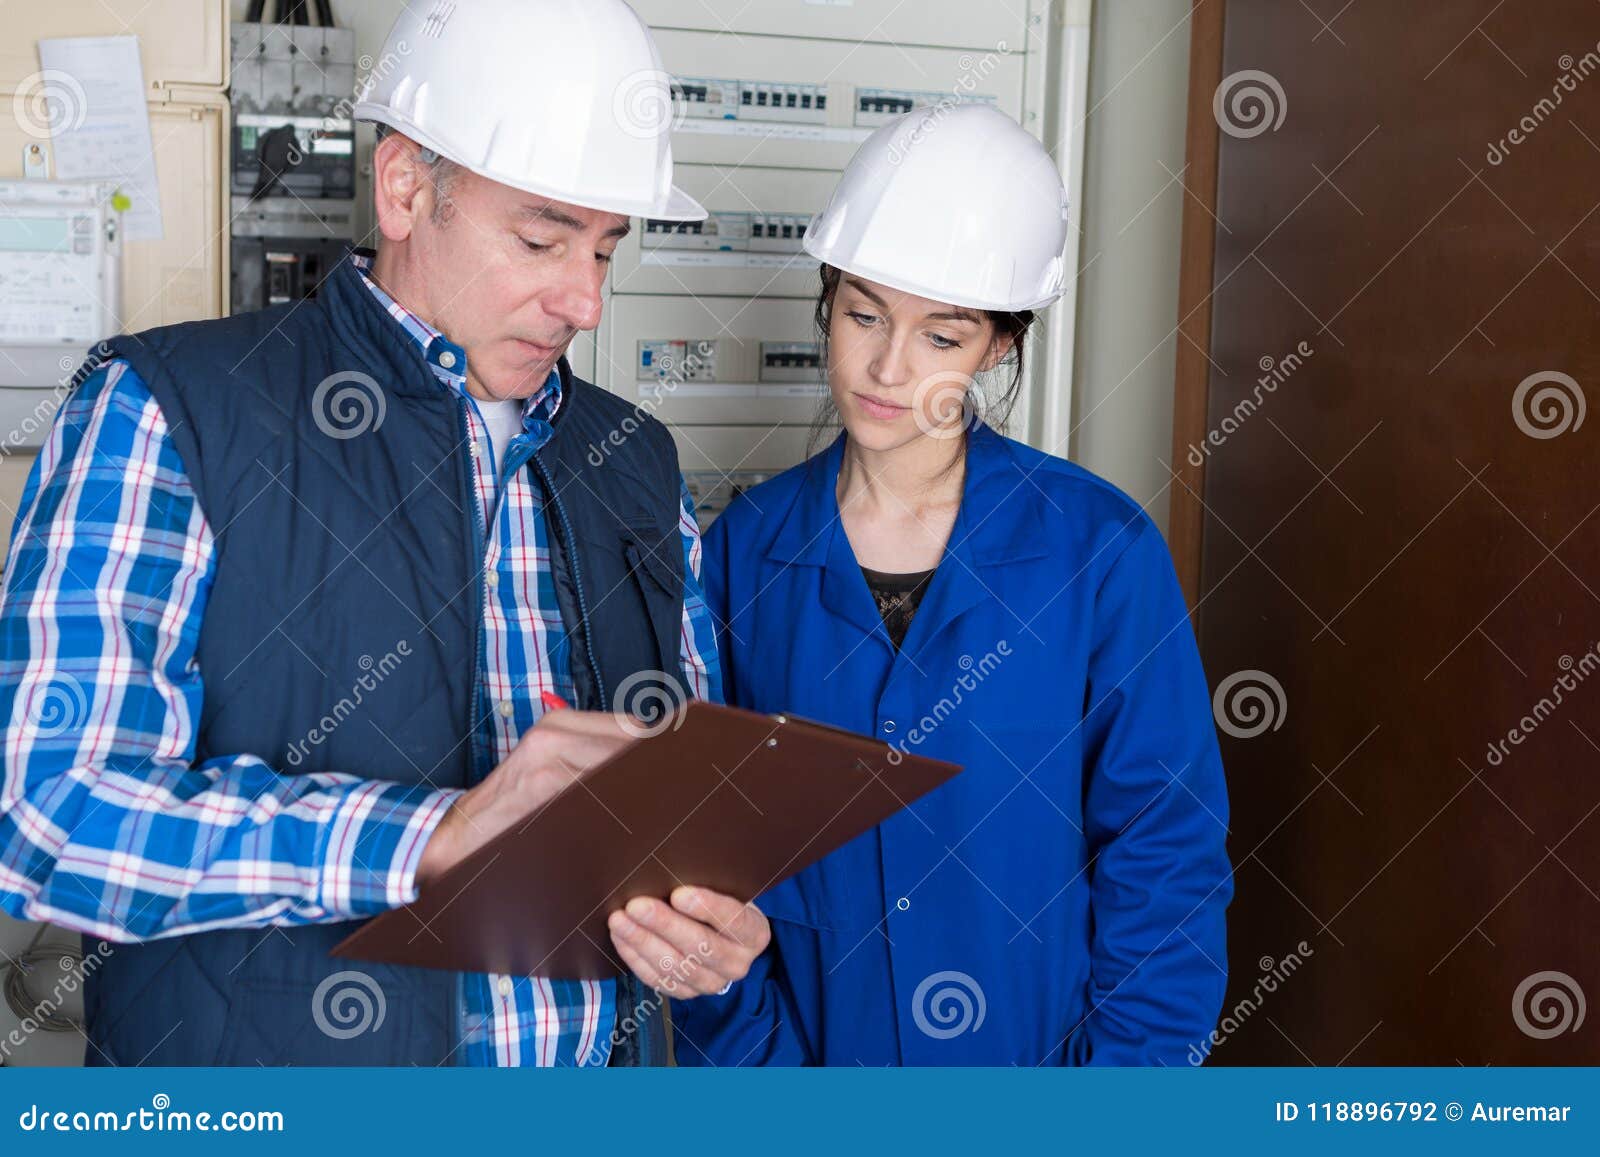 fully-fledged electrician and female apprentice